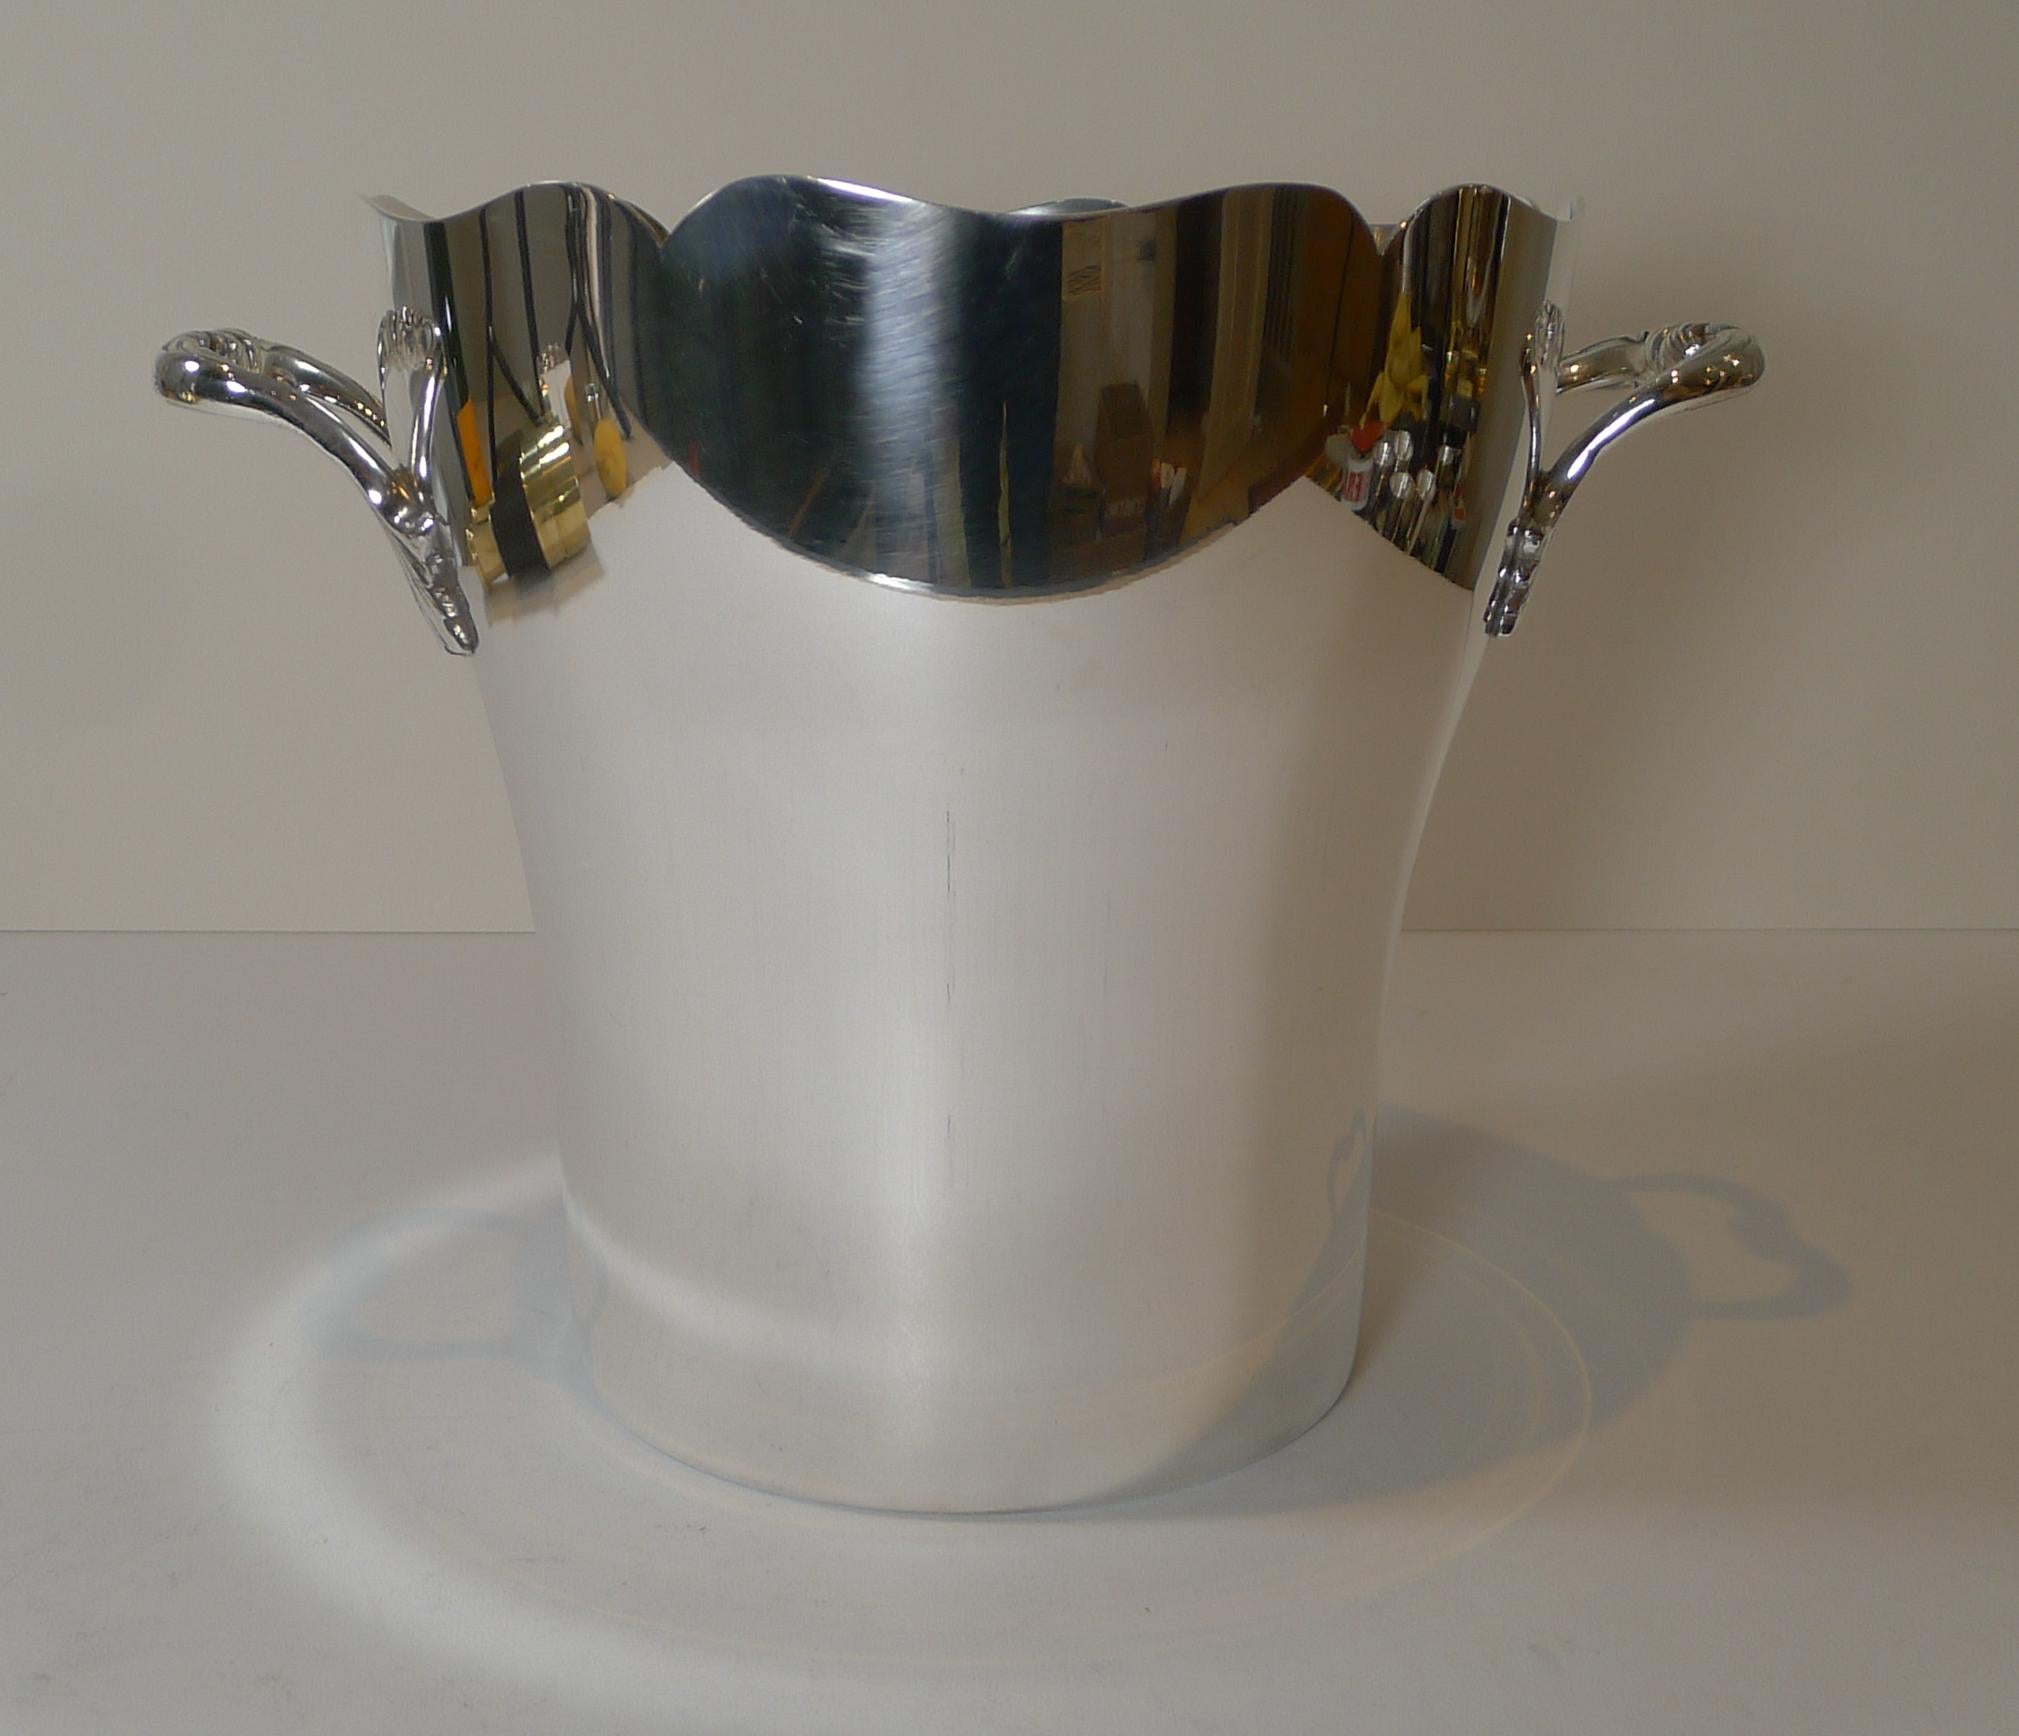 Cailar & Bayard, Paris, Elegant French Champagne Bucket / Wine Cooler c.1920 In Good Condition For Sale In Bath, GB